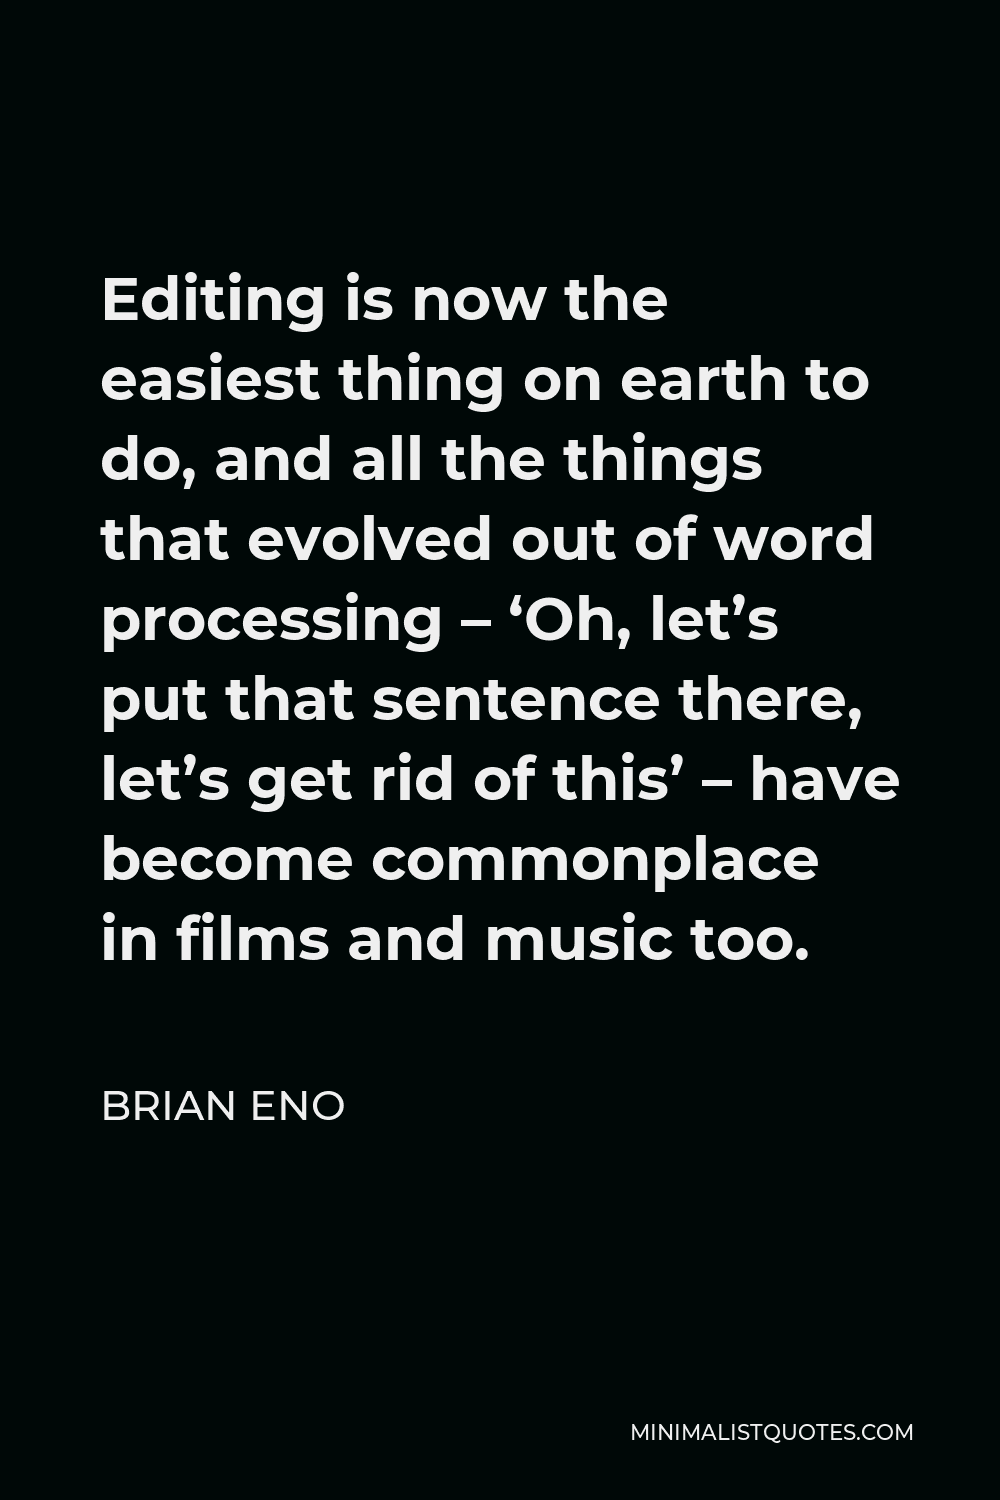 Brian Eno Quote - Editing is now the easiest thing on earth to do, and all the things that evolved out of word processing – ‘Oh, let’s put that sentence there, let’s get rid of this’ – have become commonplace in films and music too.